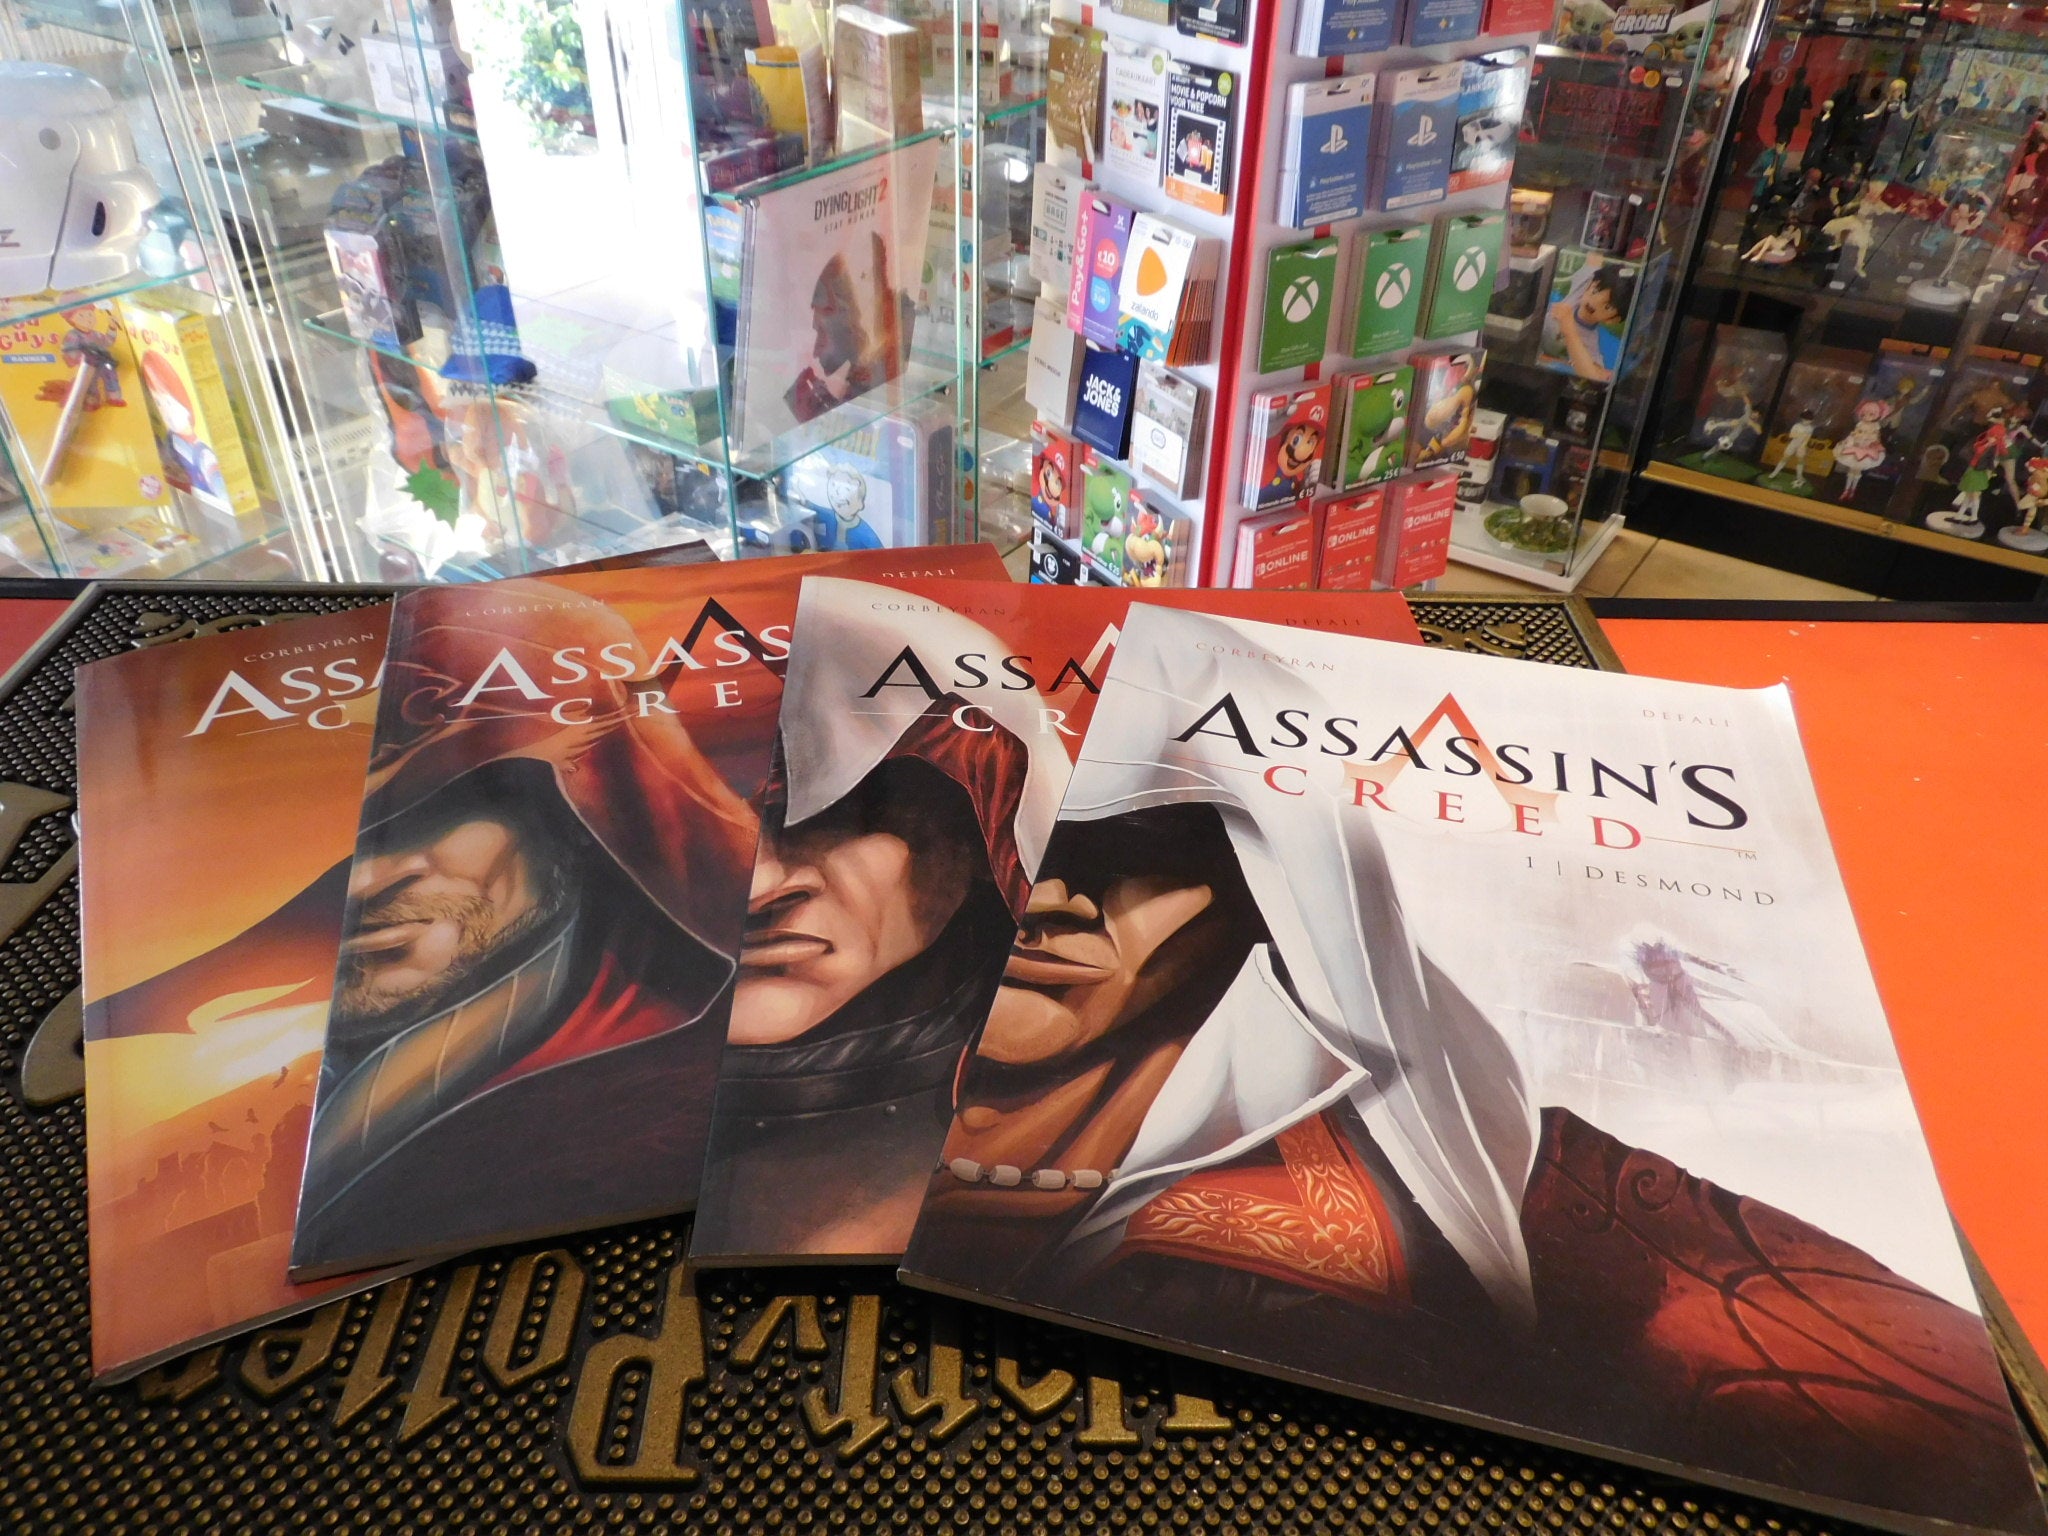 ASSASSIN'S CREED strips 1-4